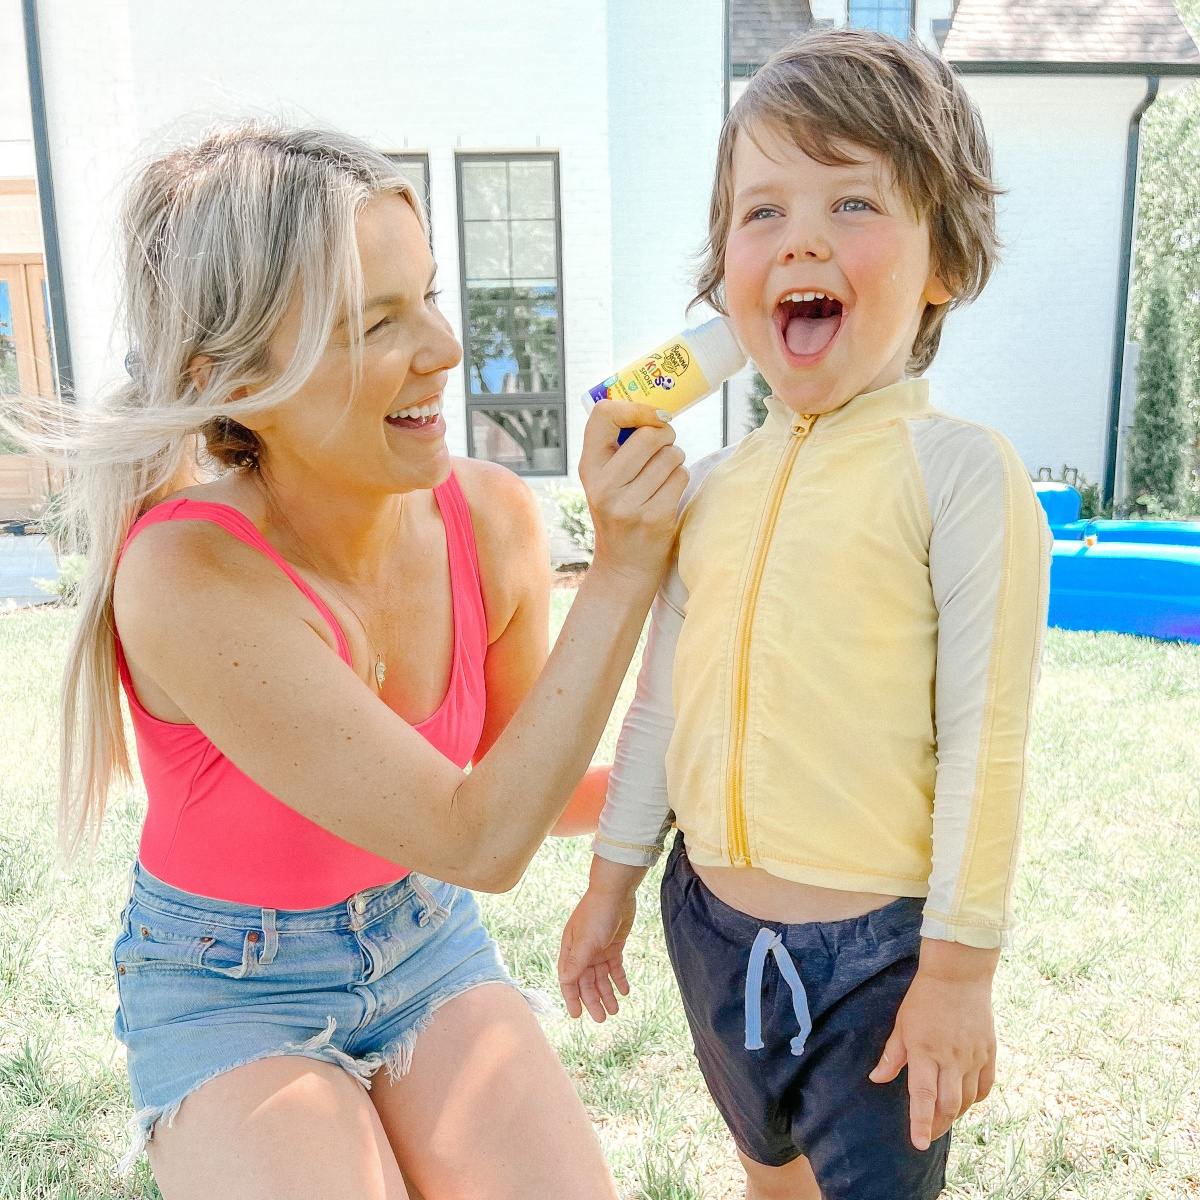 The Bachelorette's Ali Fedotowsky Shares Her Family's Essentials